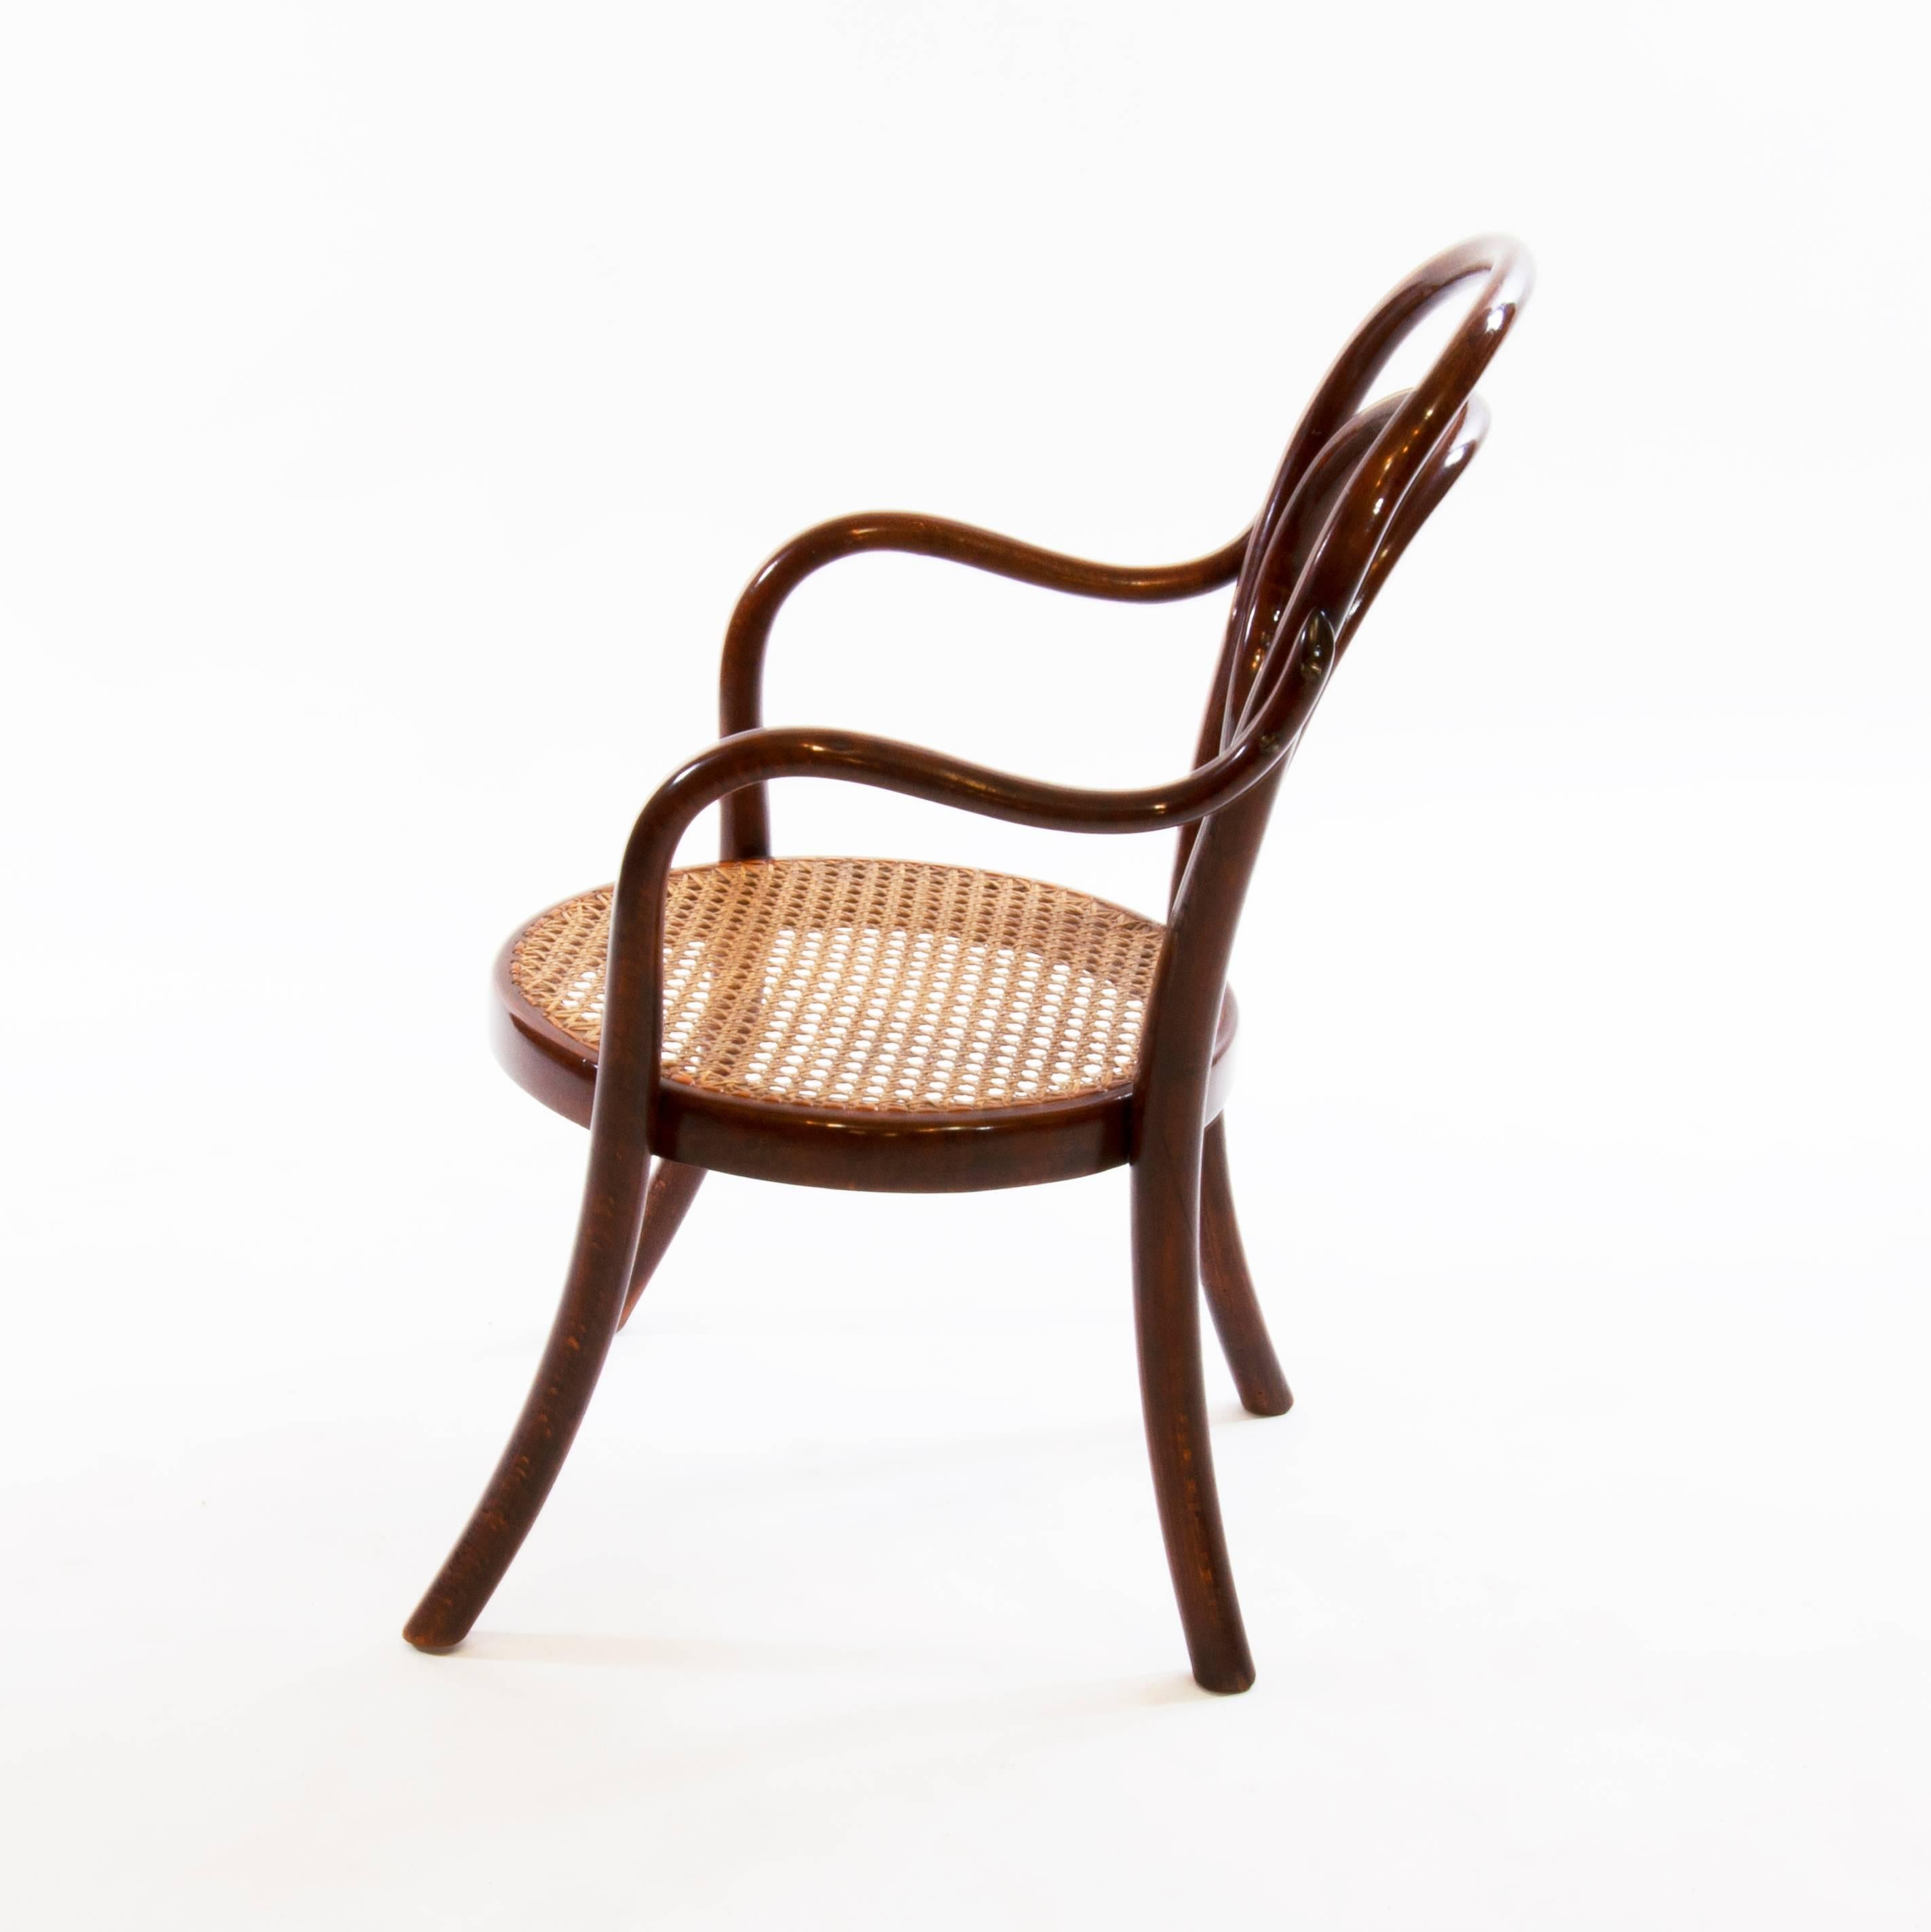 Very rare, antique and Austrian Thonet chair, which was produced between 1910-1929 and was designed by the Gebruder Thonet.
The company Thonet was found by Michael Thonet and was greatly expanded by this sons. They perfected the process of bending